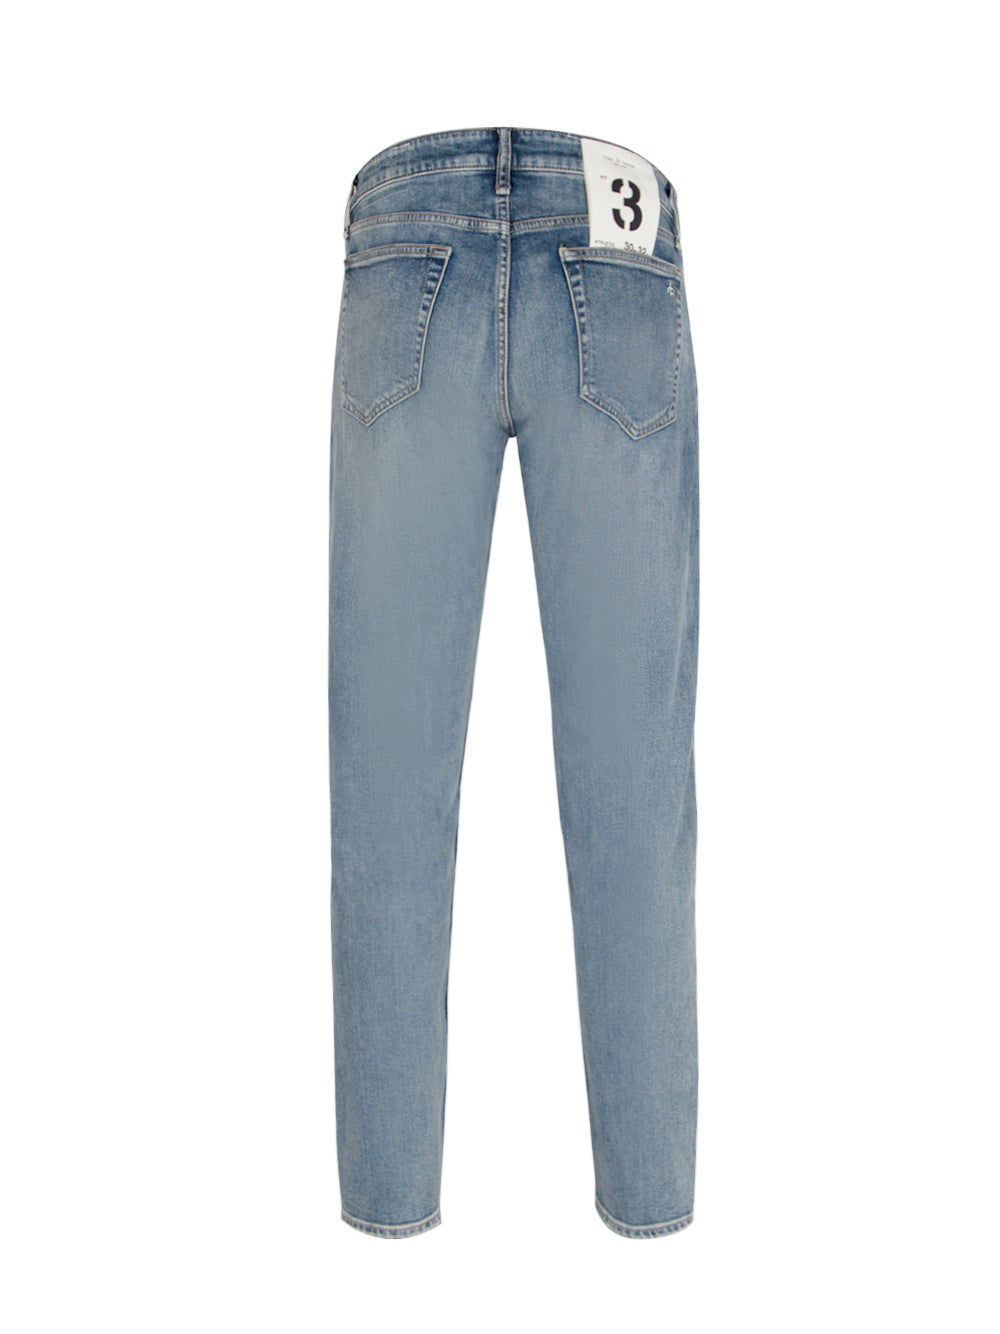 Fit-3-Athletic-Fit-Authentic-Stretch-Jean-Daytona-02